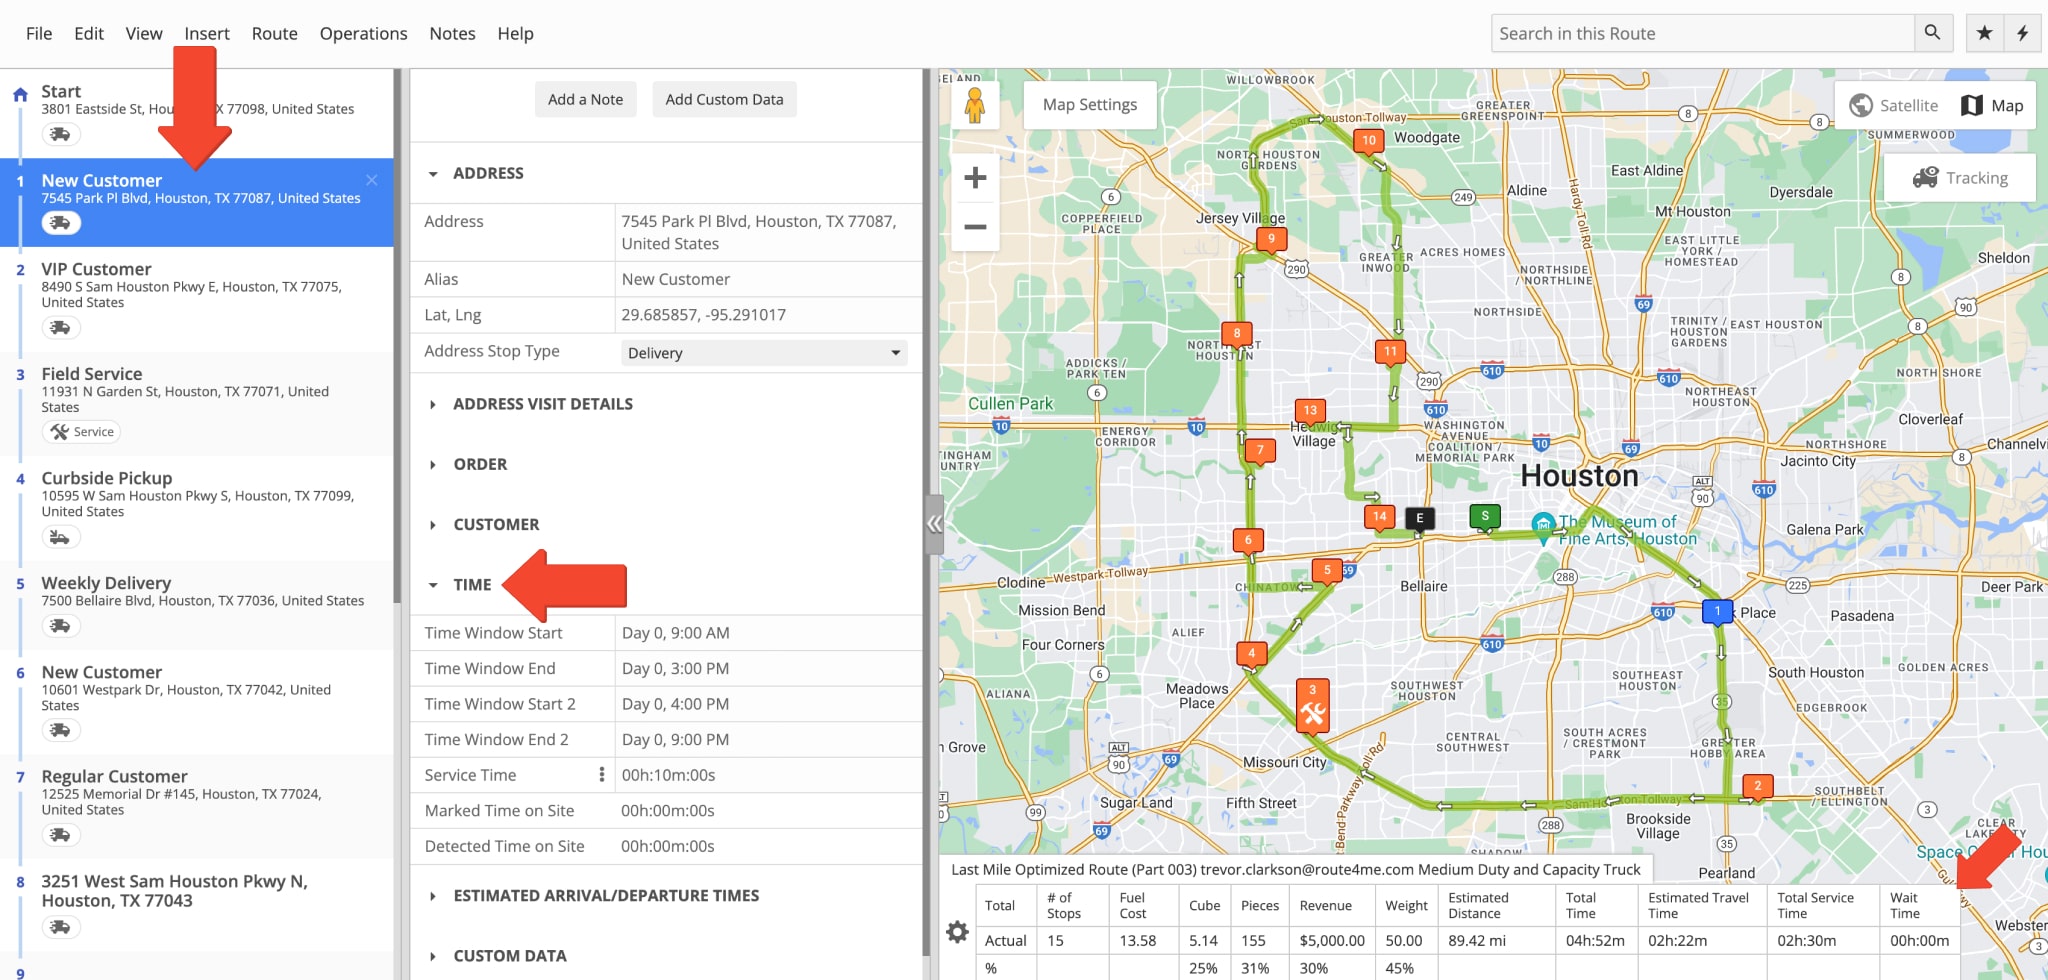 Time Windows details in the last mile route stop manifest in the Route4Me Route Editor tool.